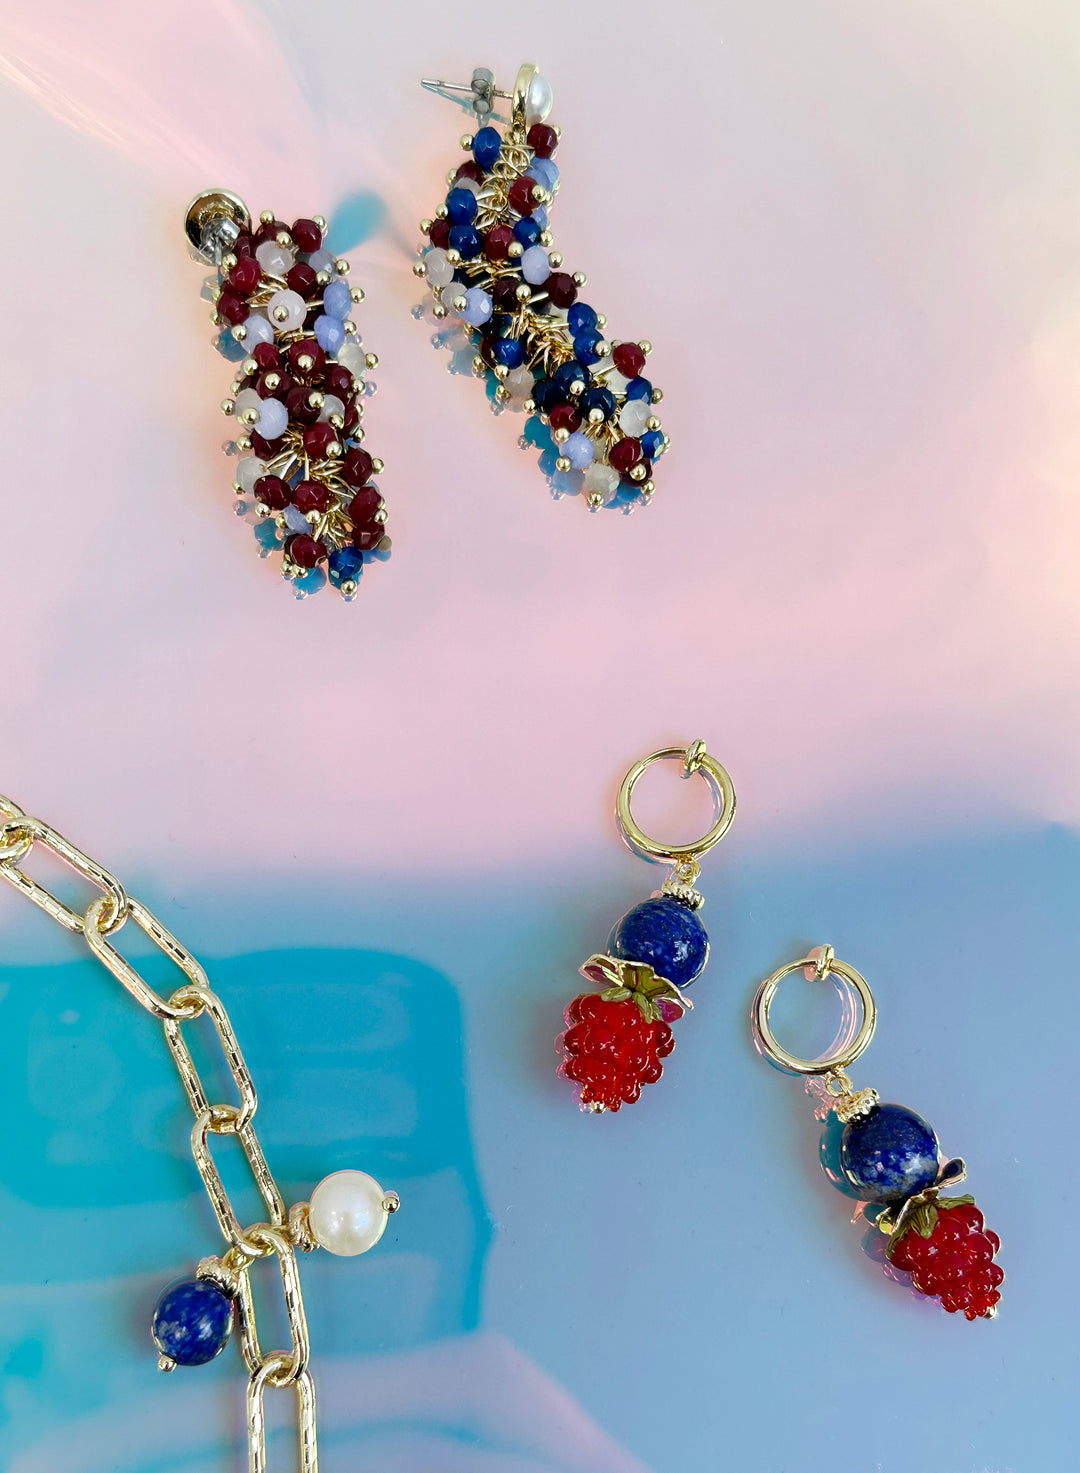 Blue Lapis with Red Rasberry Clip-on Earrings JE018 - FARRA